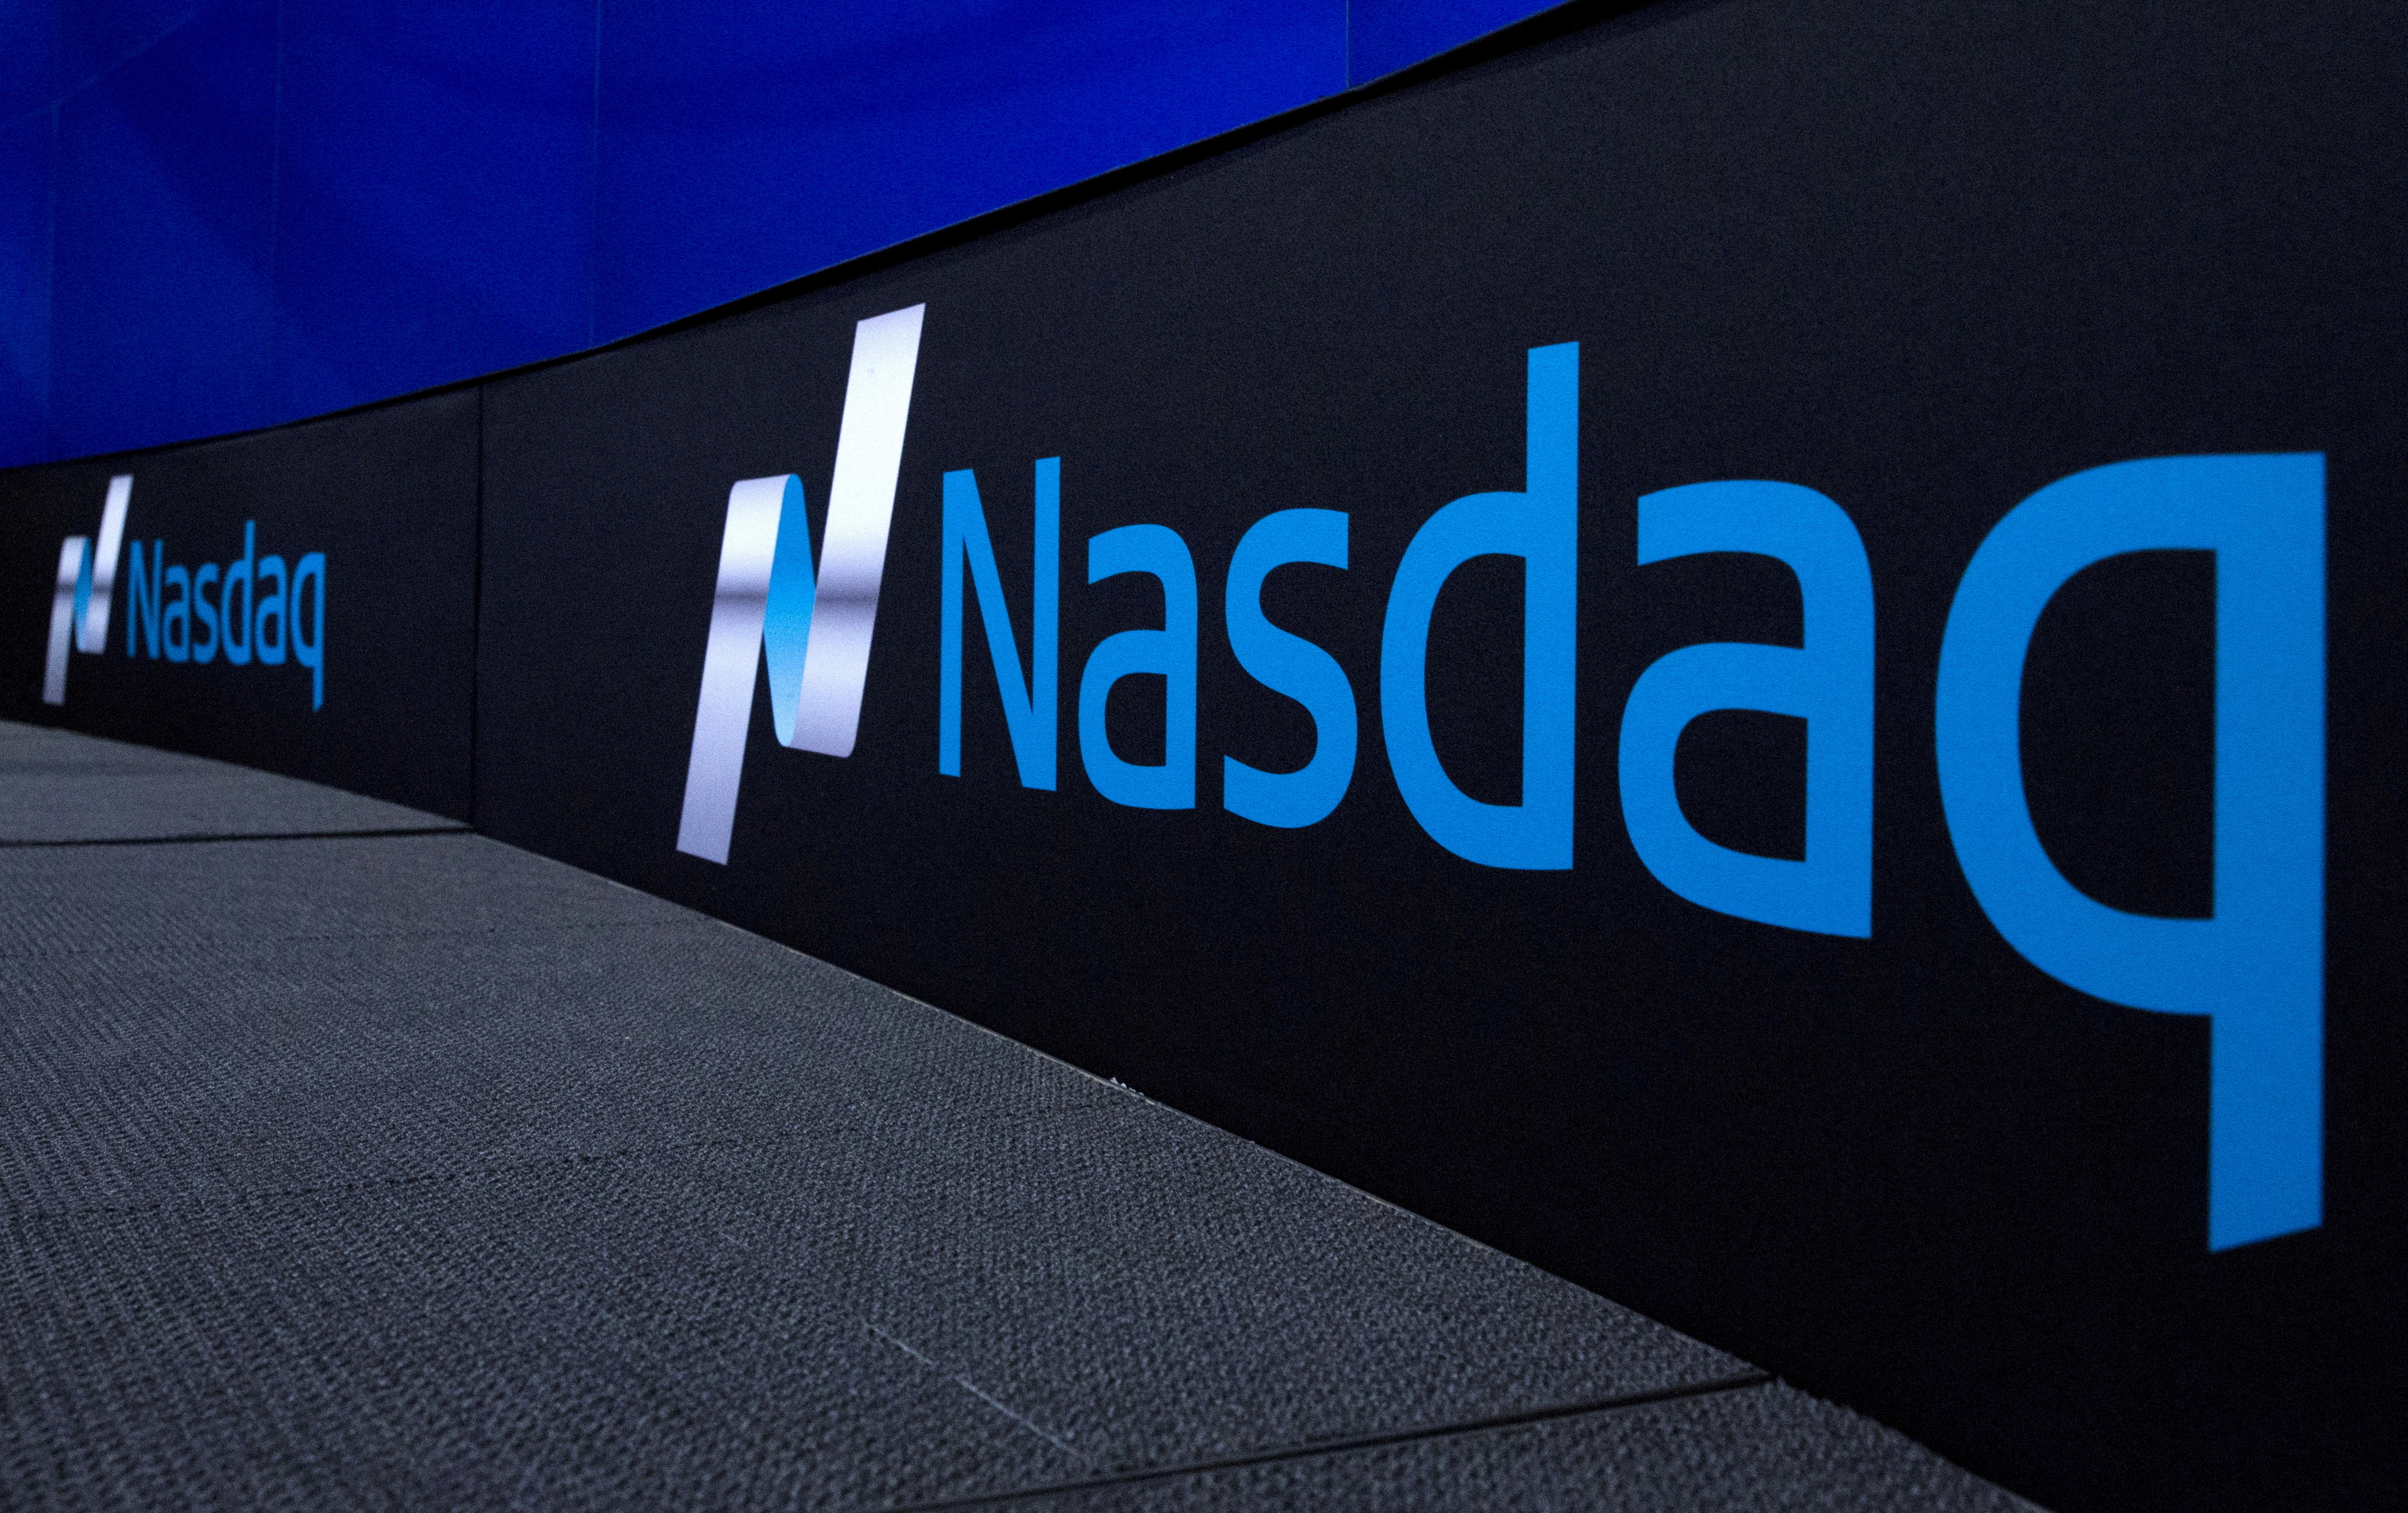 The Nasdaq logo is displayed at the Nasdaq Market site in New York September 2, 2015. REUTERS/Brendan McDermid/File Photo